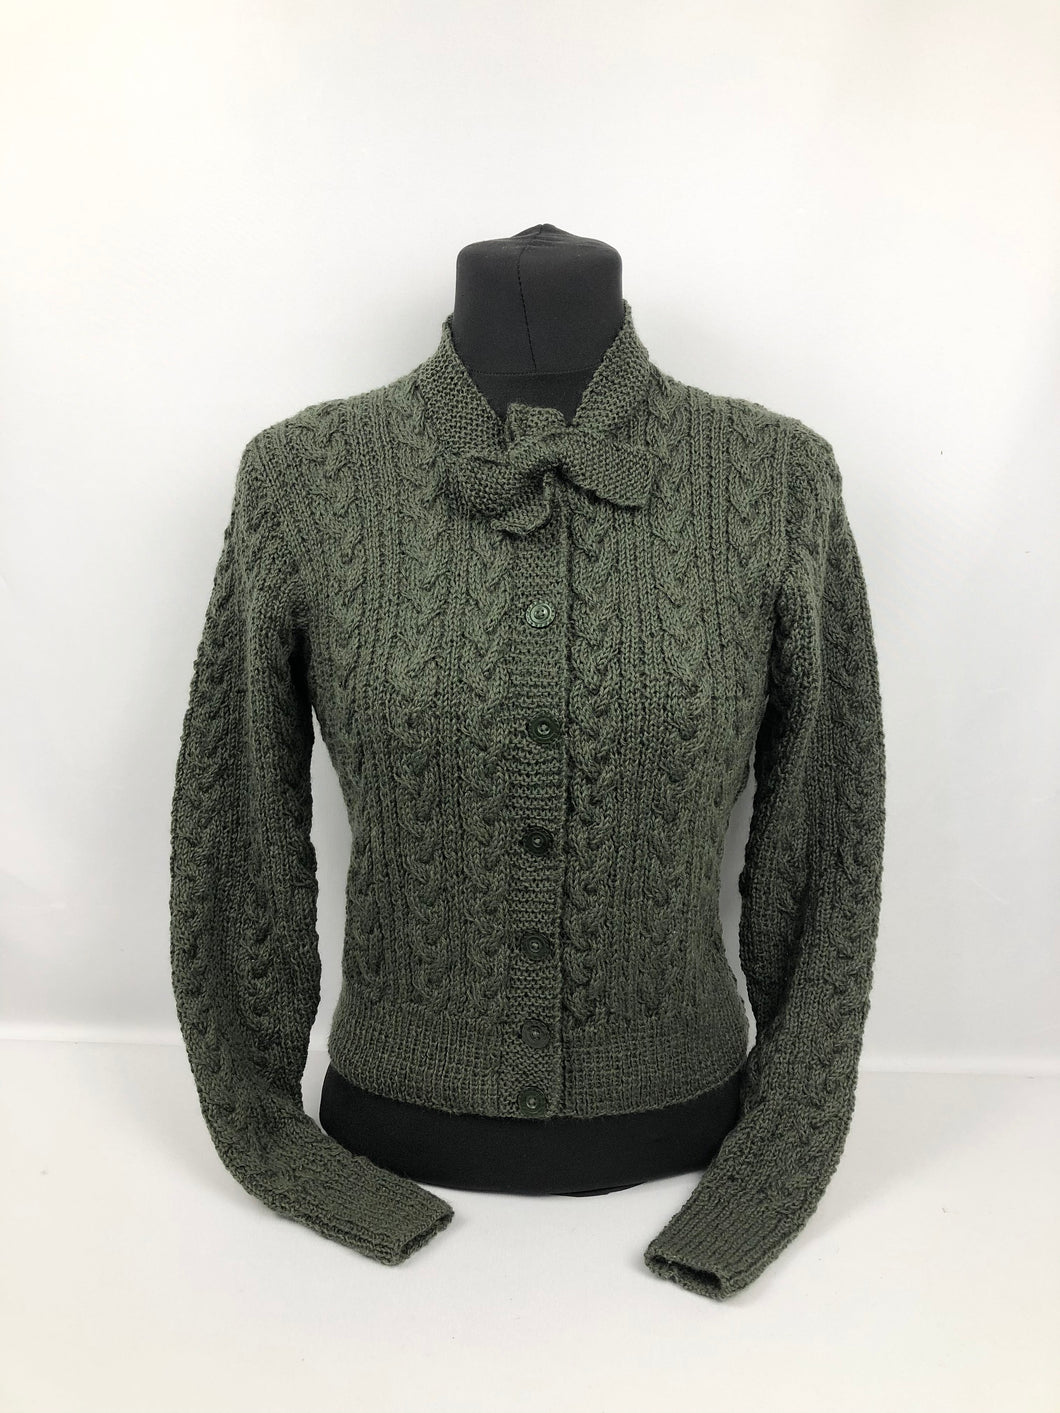 Reproduction 1930s Green Cable Knit Cardigan with Bow Neck Tie - B35 38